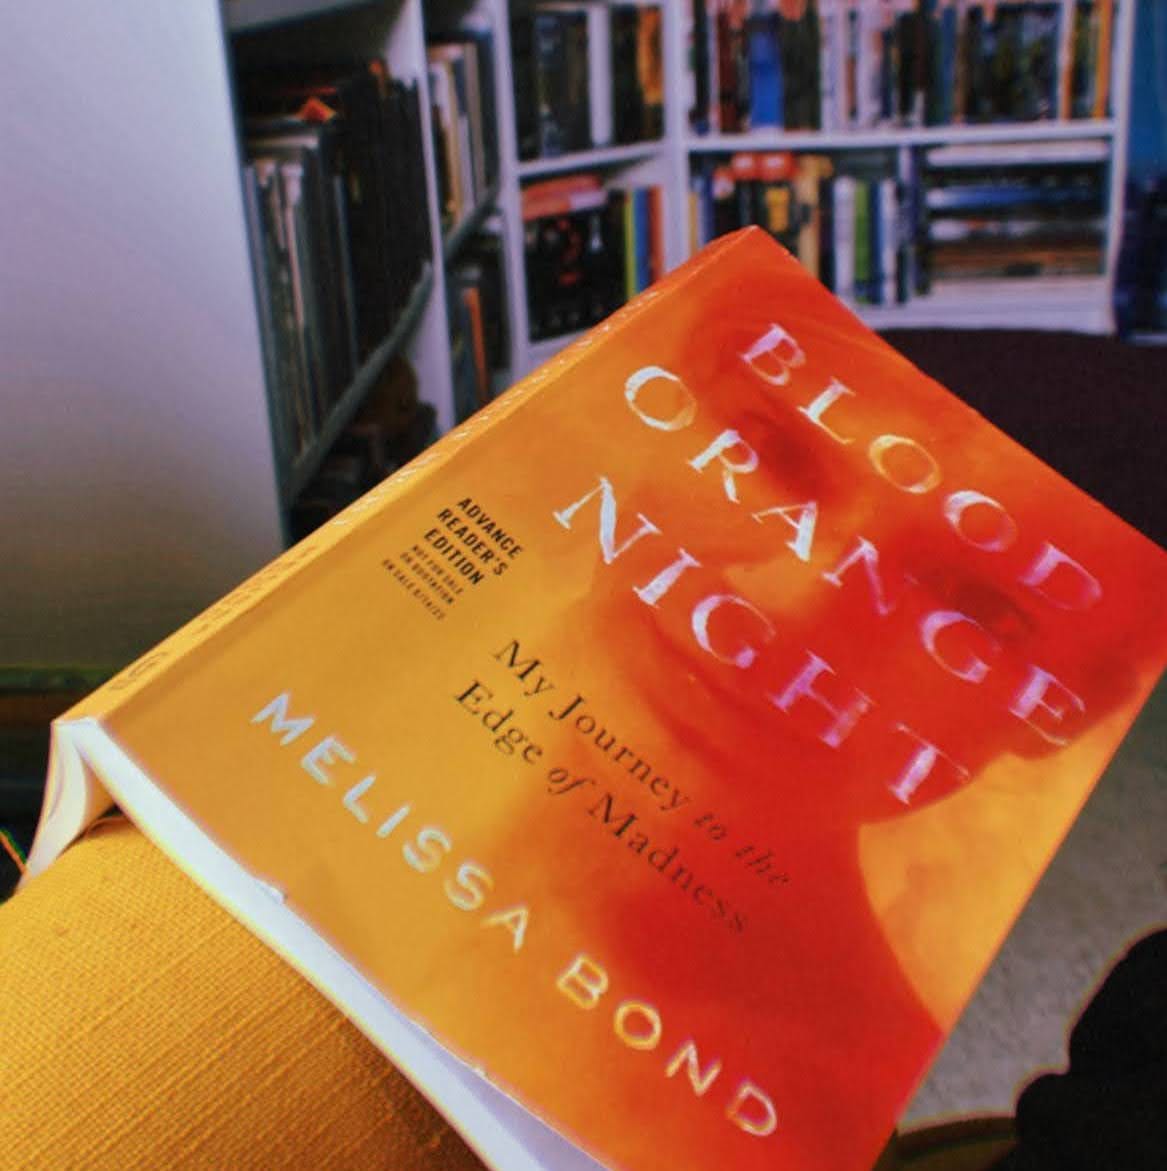 An advance reader copy of Blood Orange Night by Melissa Bond draped over a chair.